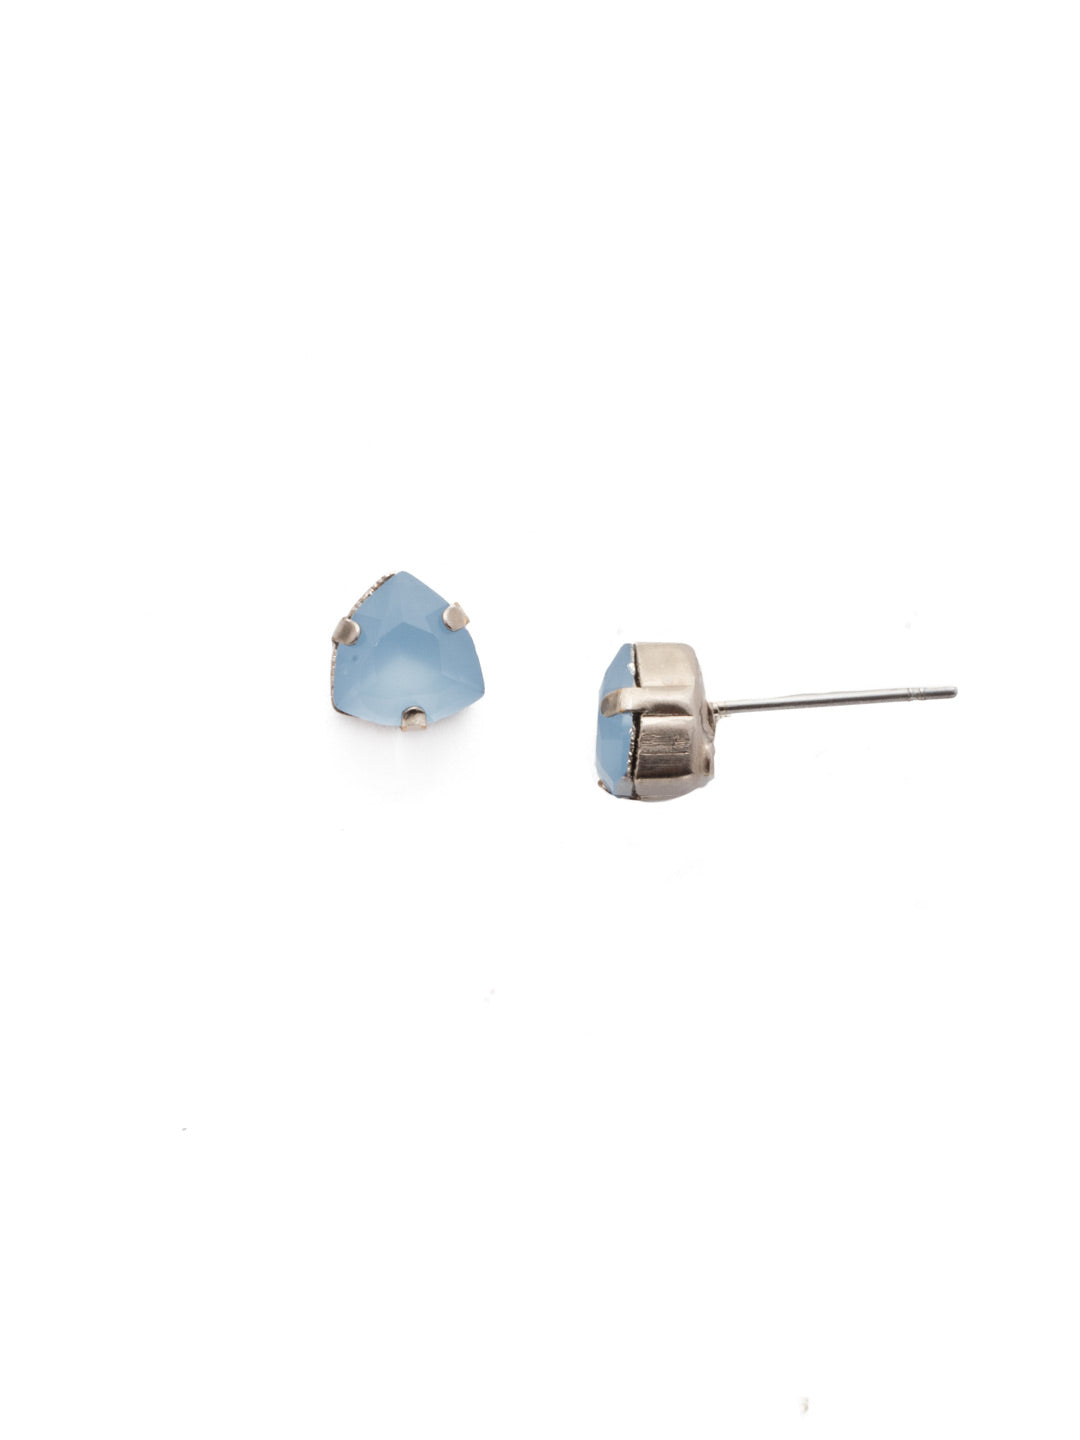 Sedge Stud Earrings - EDX1ASGLC - A shield shaped crystal in a simple pronged setting. Perfect if you want to add just a bit of sparkle to any outfit! From Sorrelli's Glacier collection in our Antique Silver-tone finish.